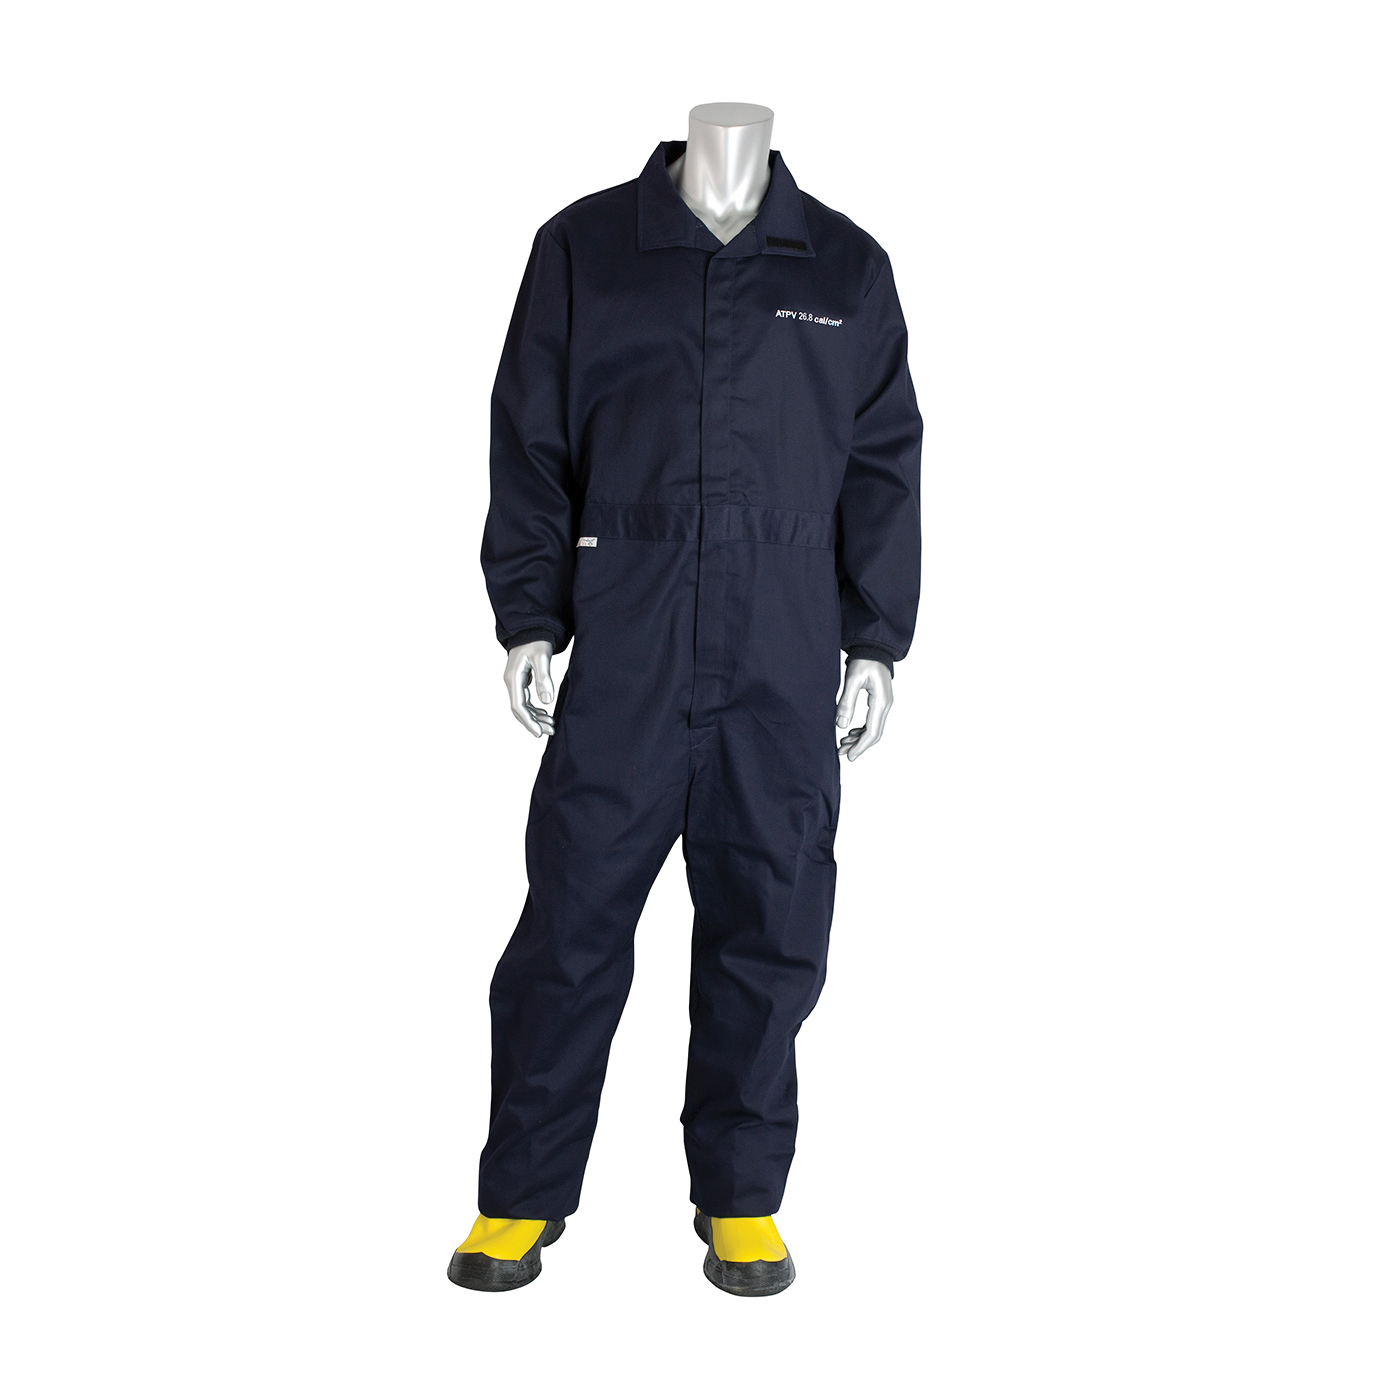 PIP® 9100-52772/5XL Flame Resistant Coverall, 5XL, Navy, Westex® Ultra Soft®/88% Cotton/12% Nylon, 64 to 66 in Chest, 32 in L Inseam